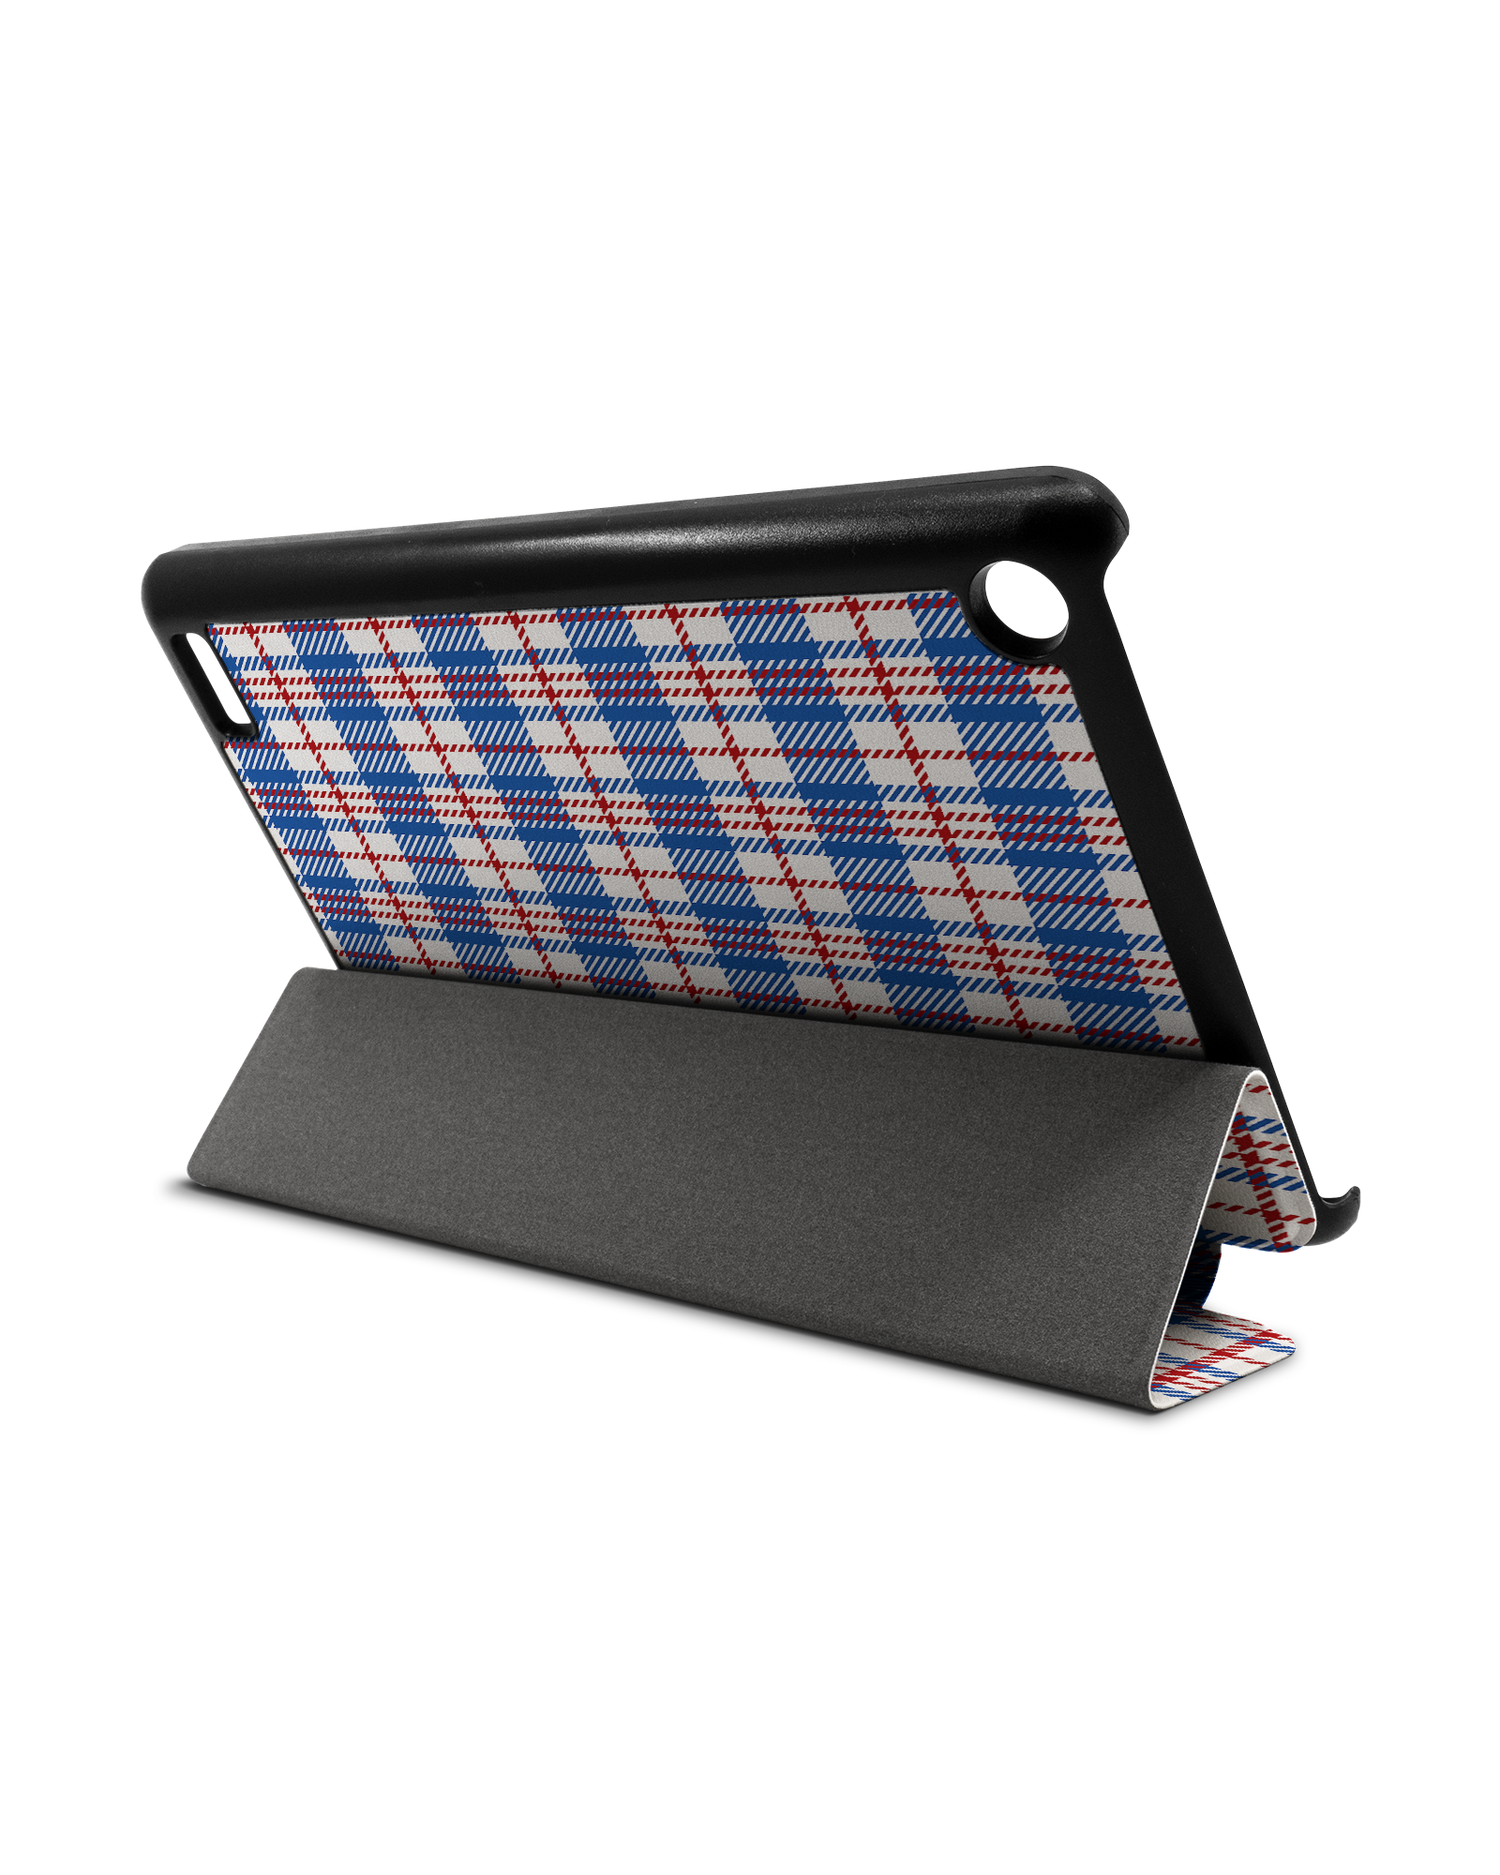 Plaid Market Bag Tablet Smart Case for Amazon Fire 7: Used as Stand